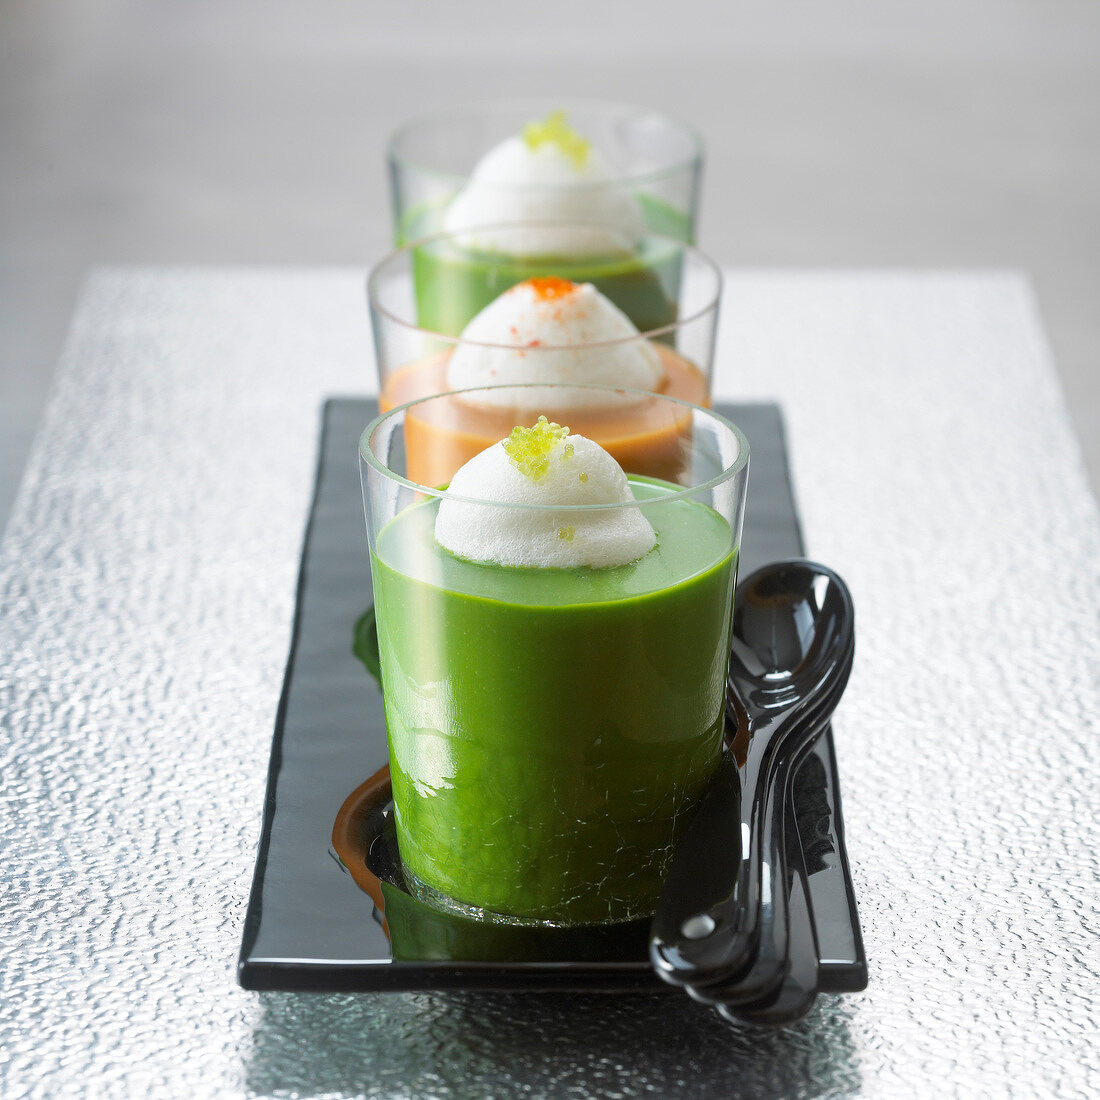 Glasses of watercress soup and glass of lobster bisque